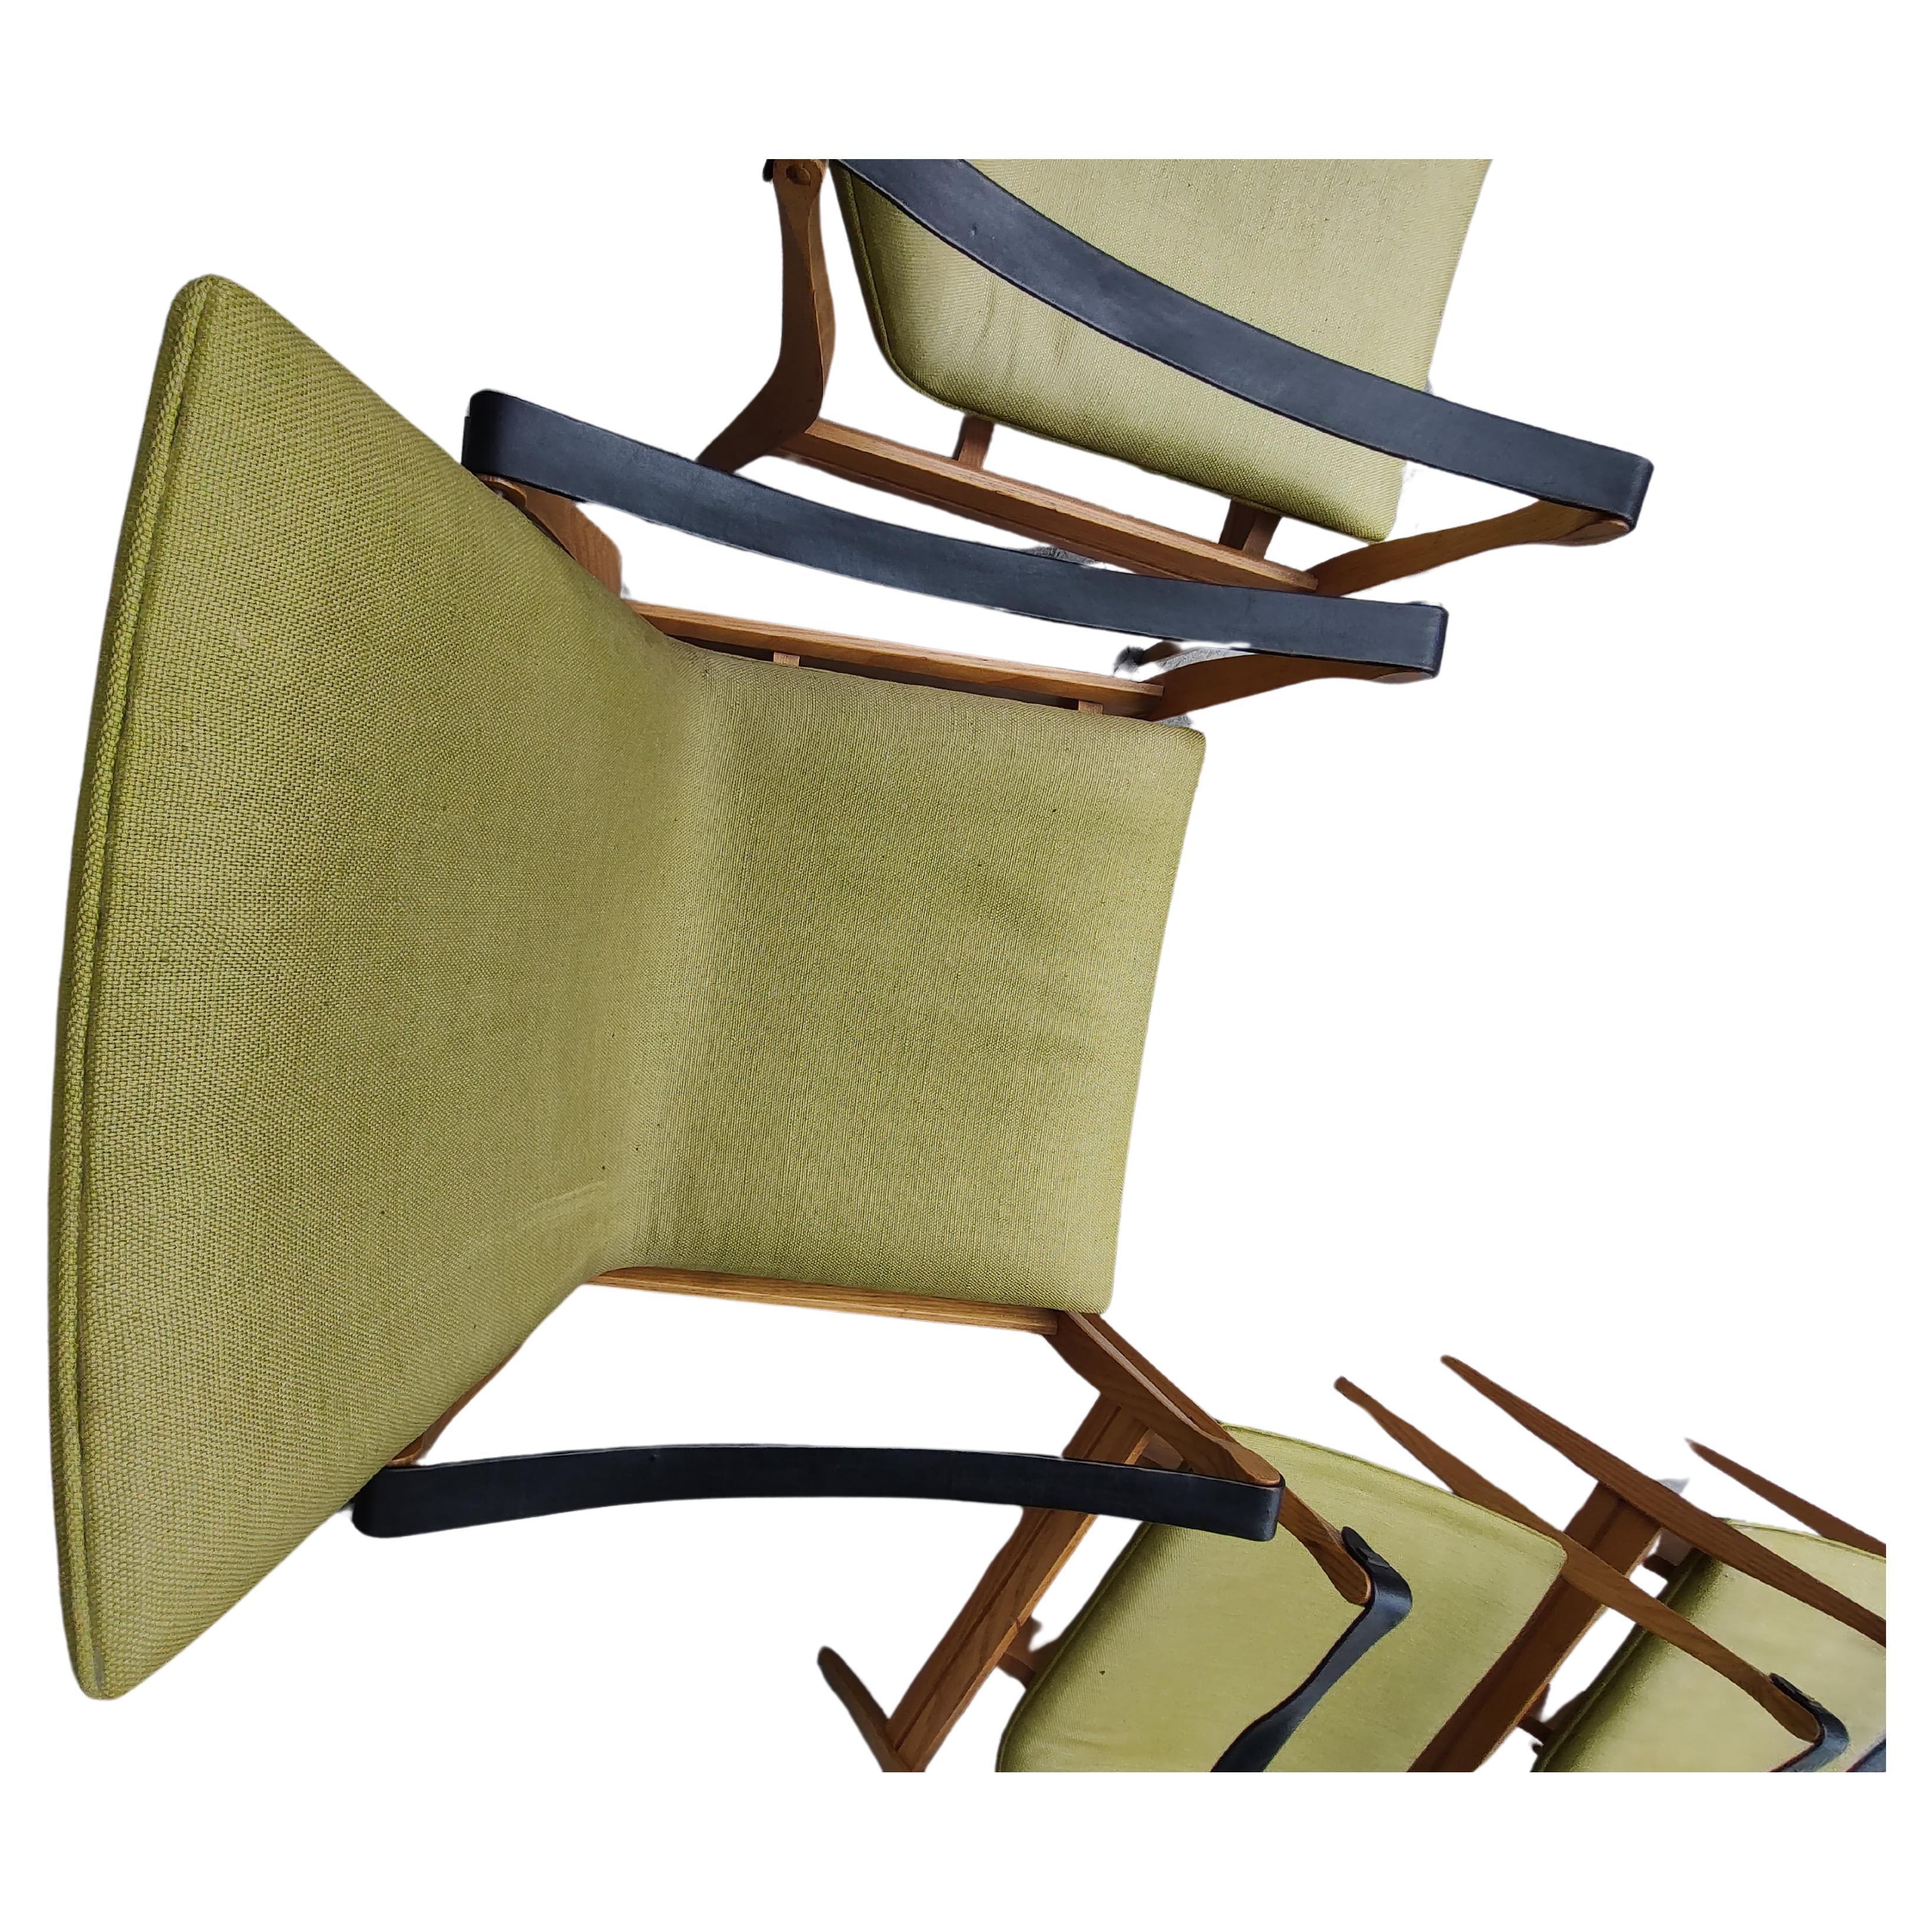 Fabulous pair of Safari Chairs by Karen and Ebbe Clemmensen for Fritz Hansen. Ash frames with black leather straps. Green fabric is good and strong with no damage but a little sun bleached. Brass accents which lock in the leather straps to the legs.